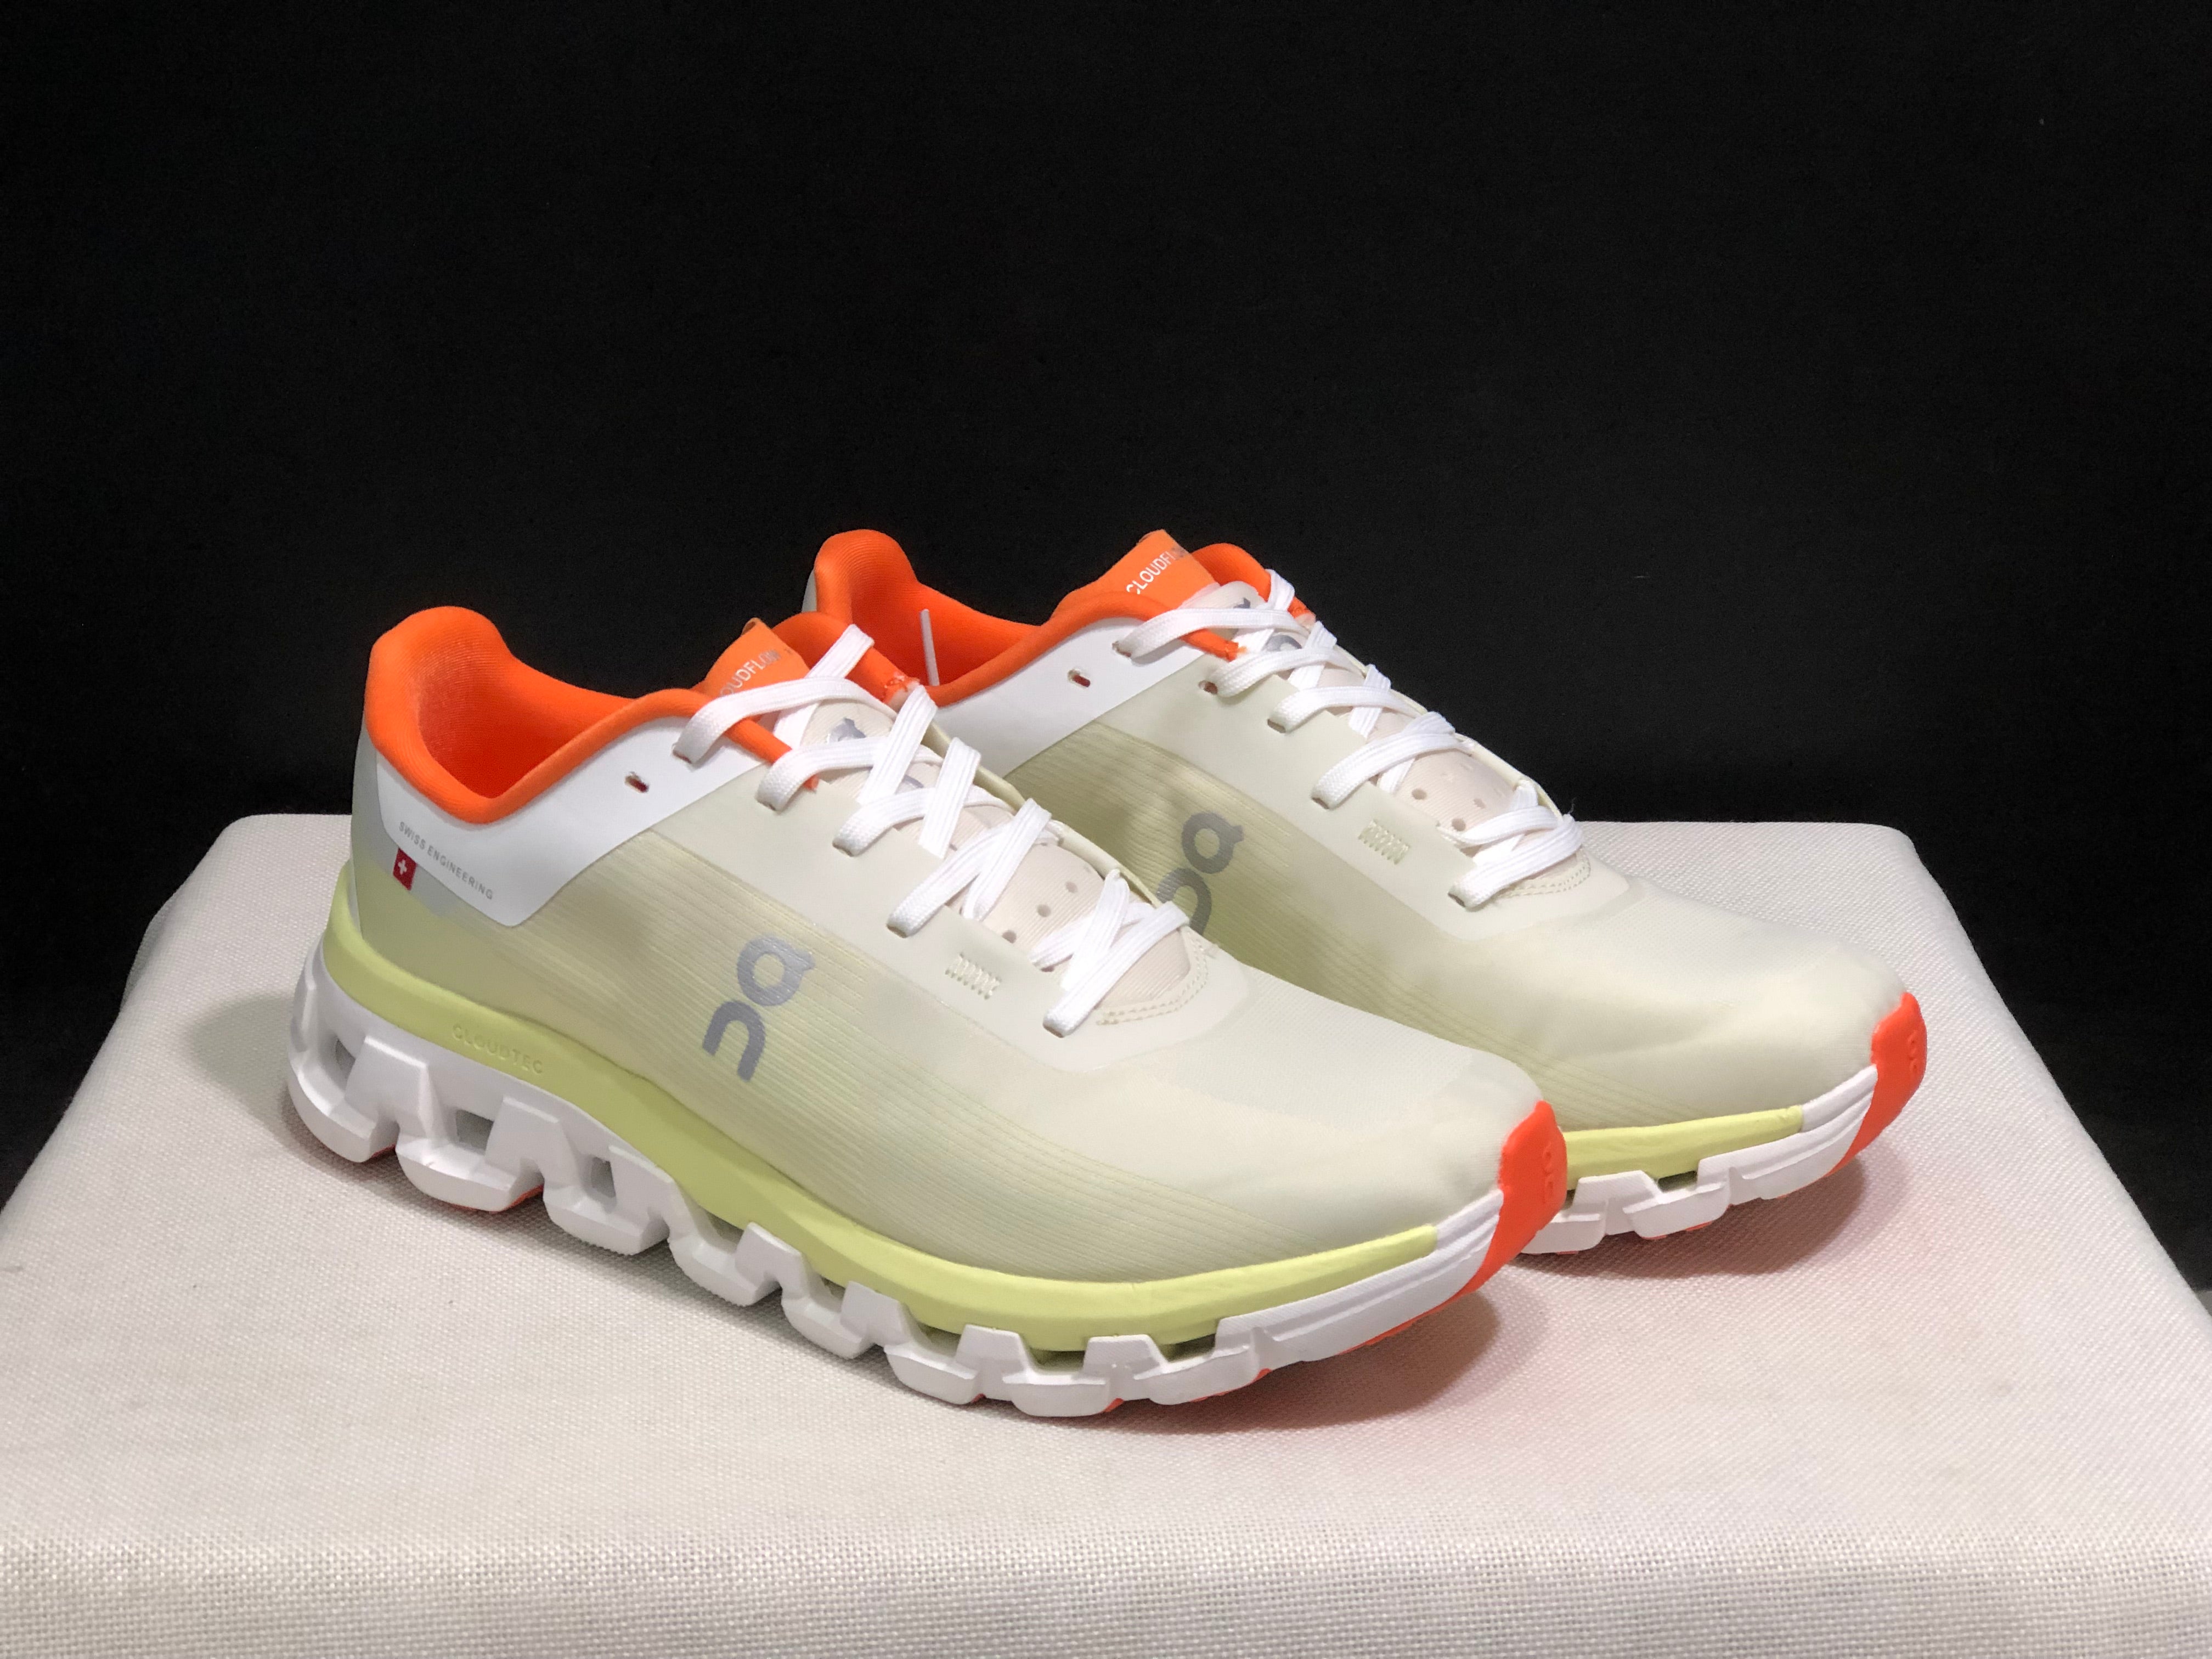 On Cloud Cloudflow 4 New Generation green and orange running Shoes  pair 